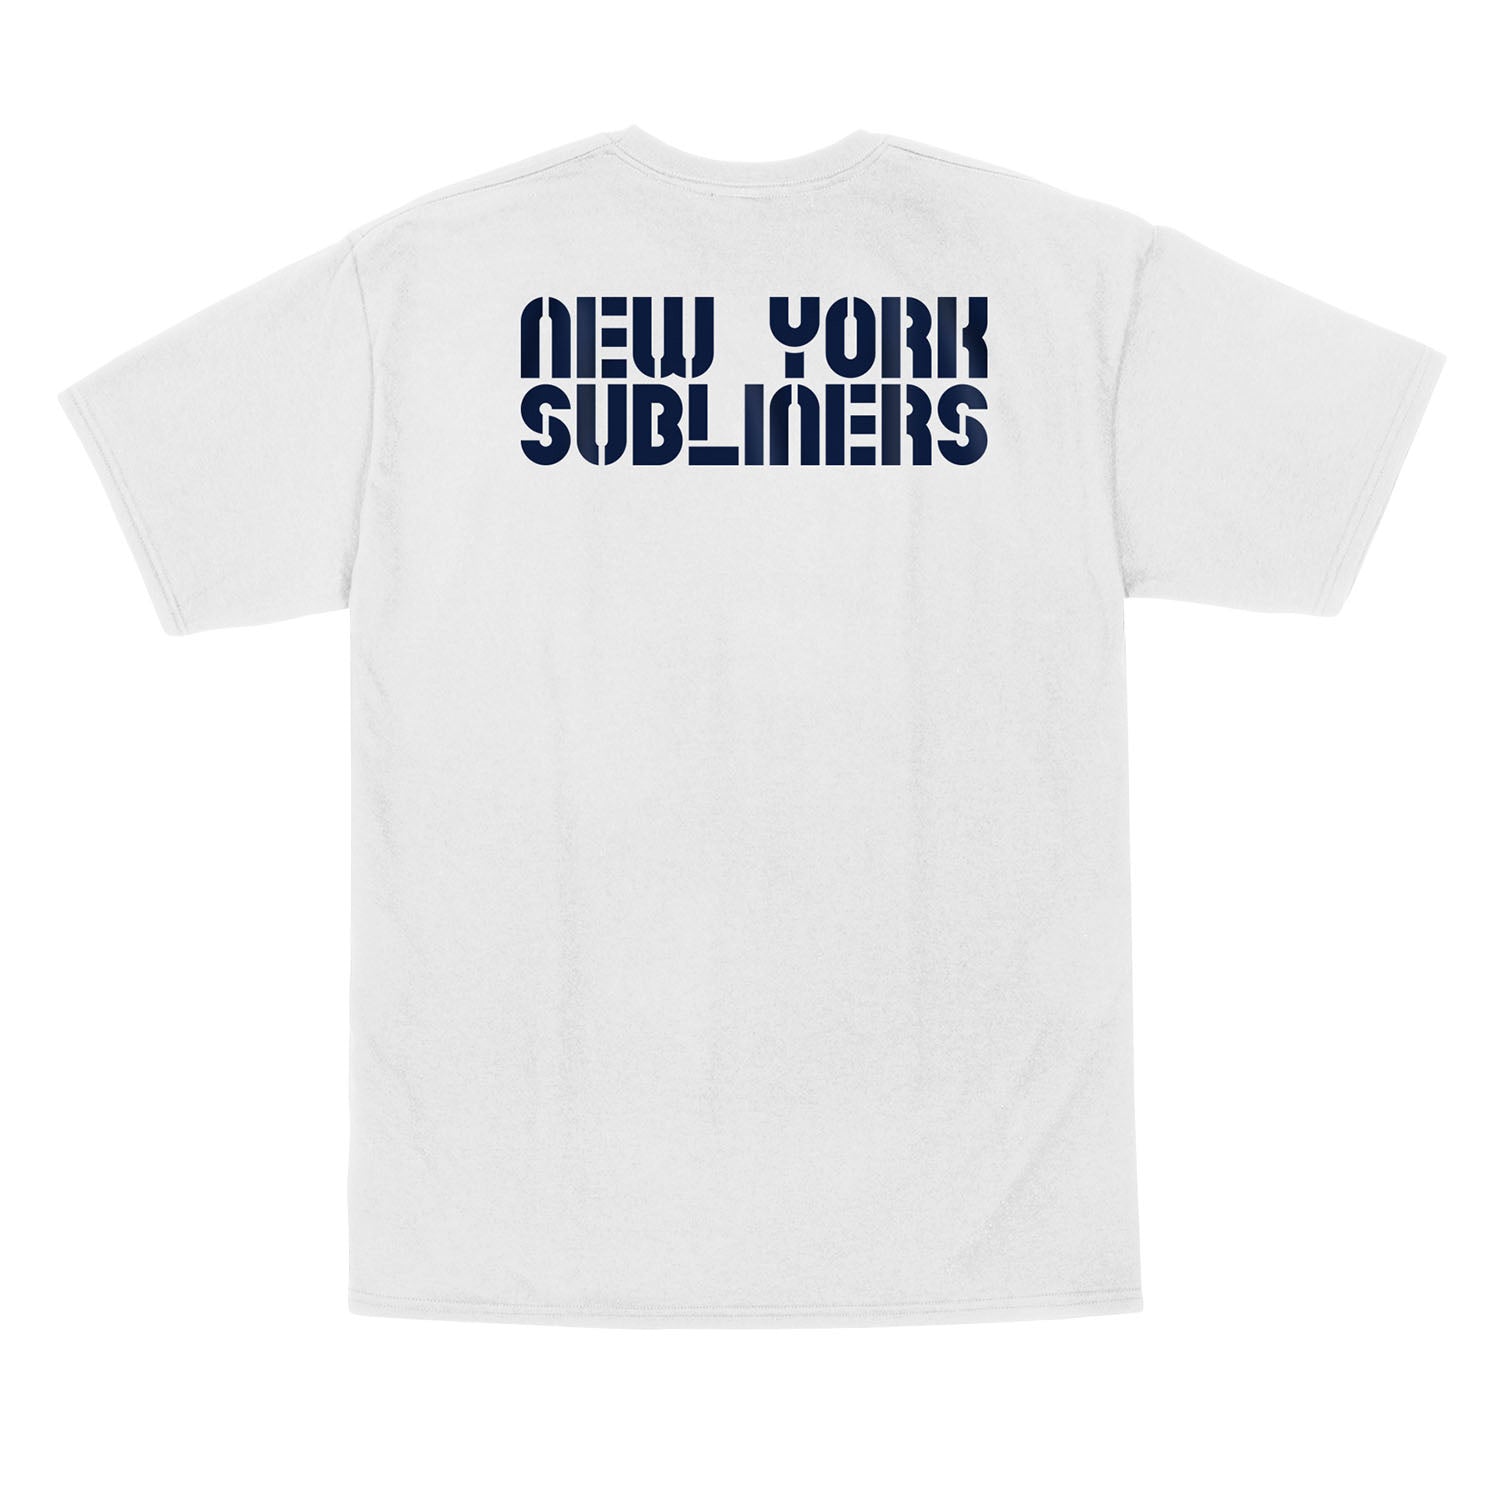 New York Subliners Native White T-Shirt - Back View